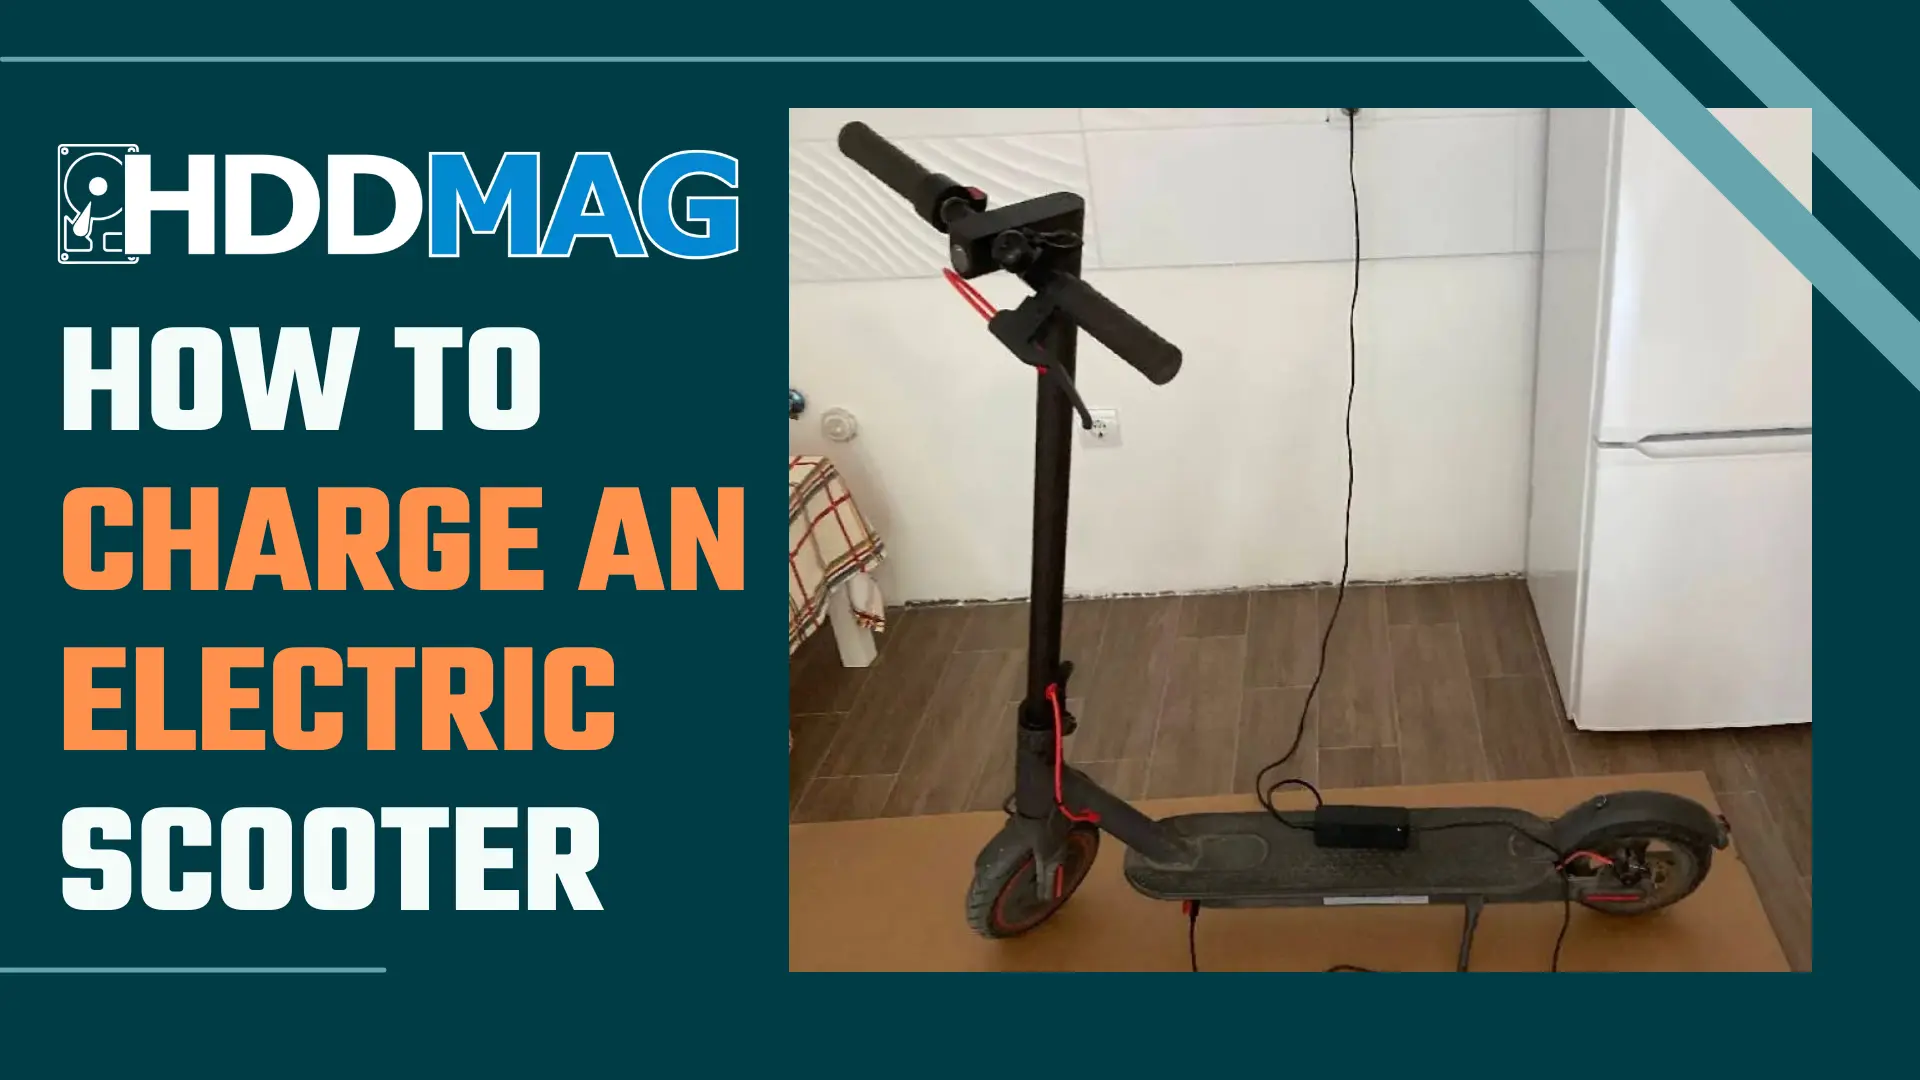 How To Charge an Electric Scooter